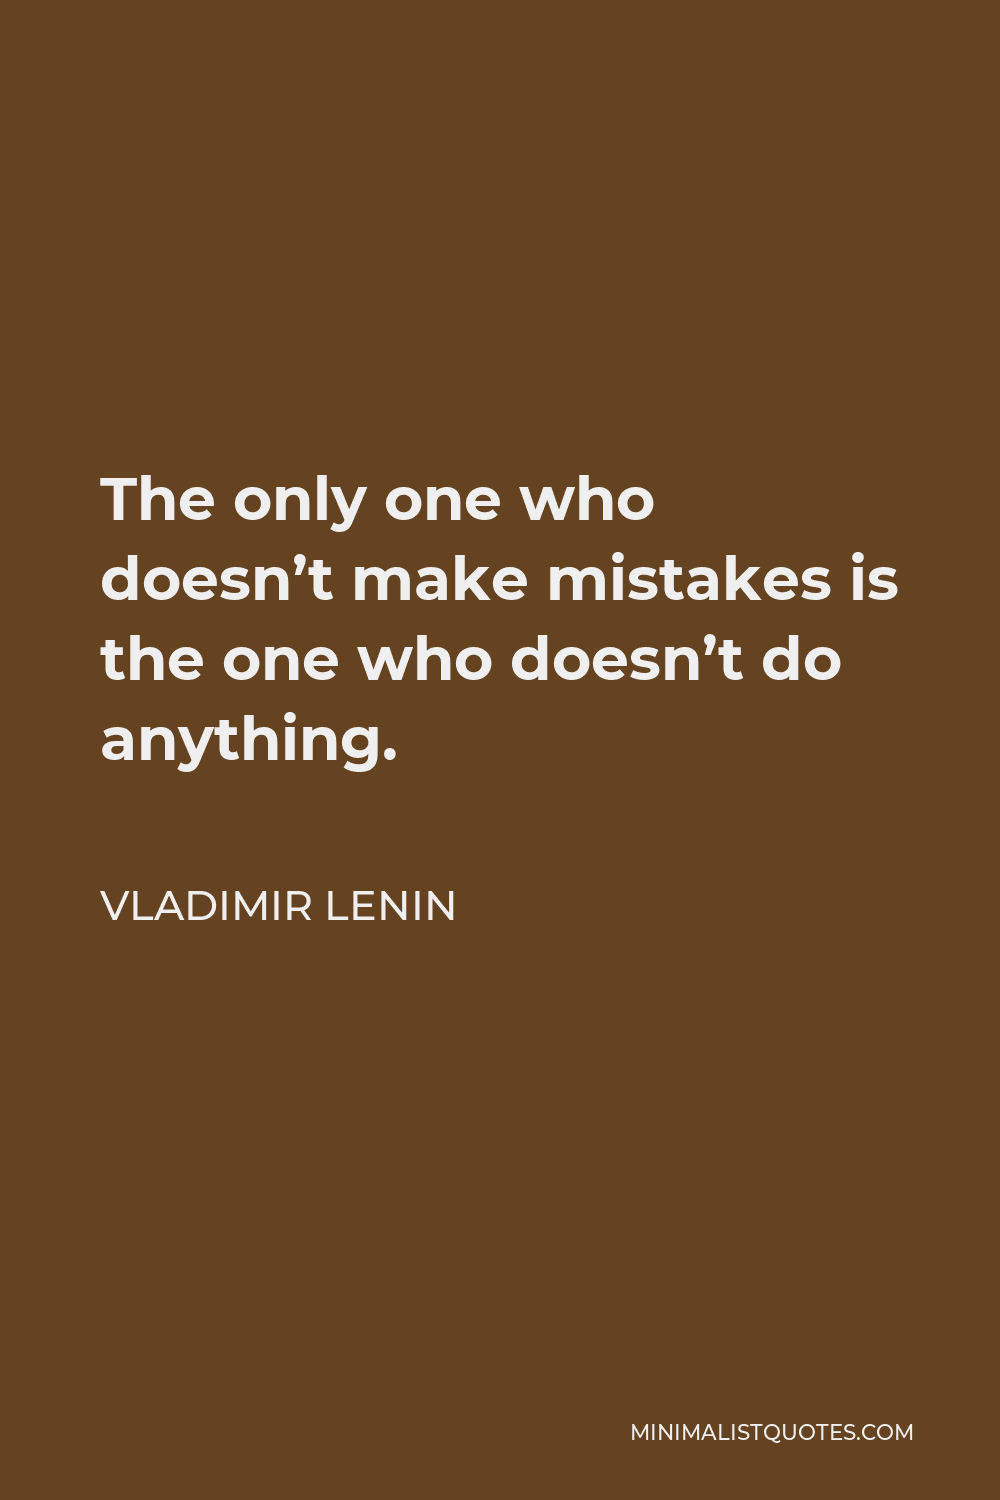 Vladimir Lenin Quote - The only one who doesn’t make mistakes is the one who doesn’t do anything.